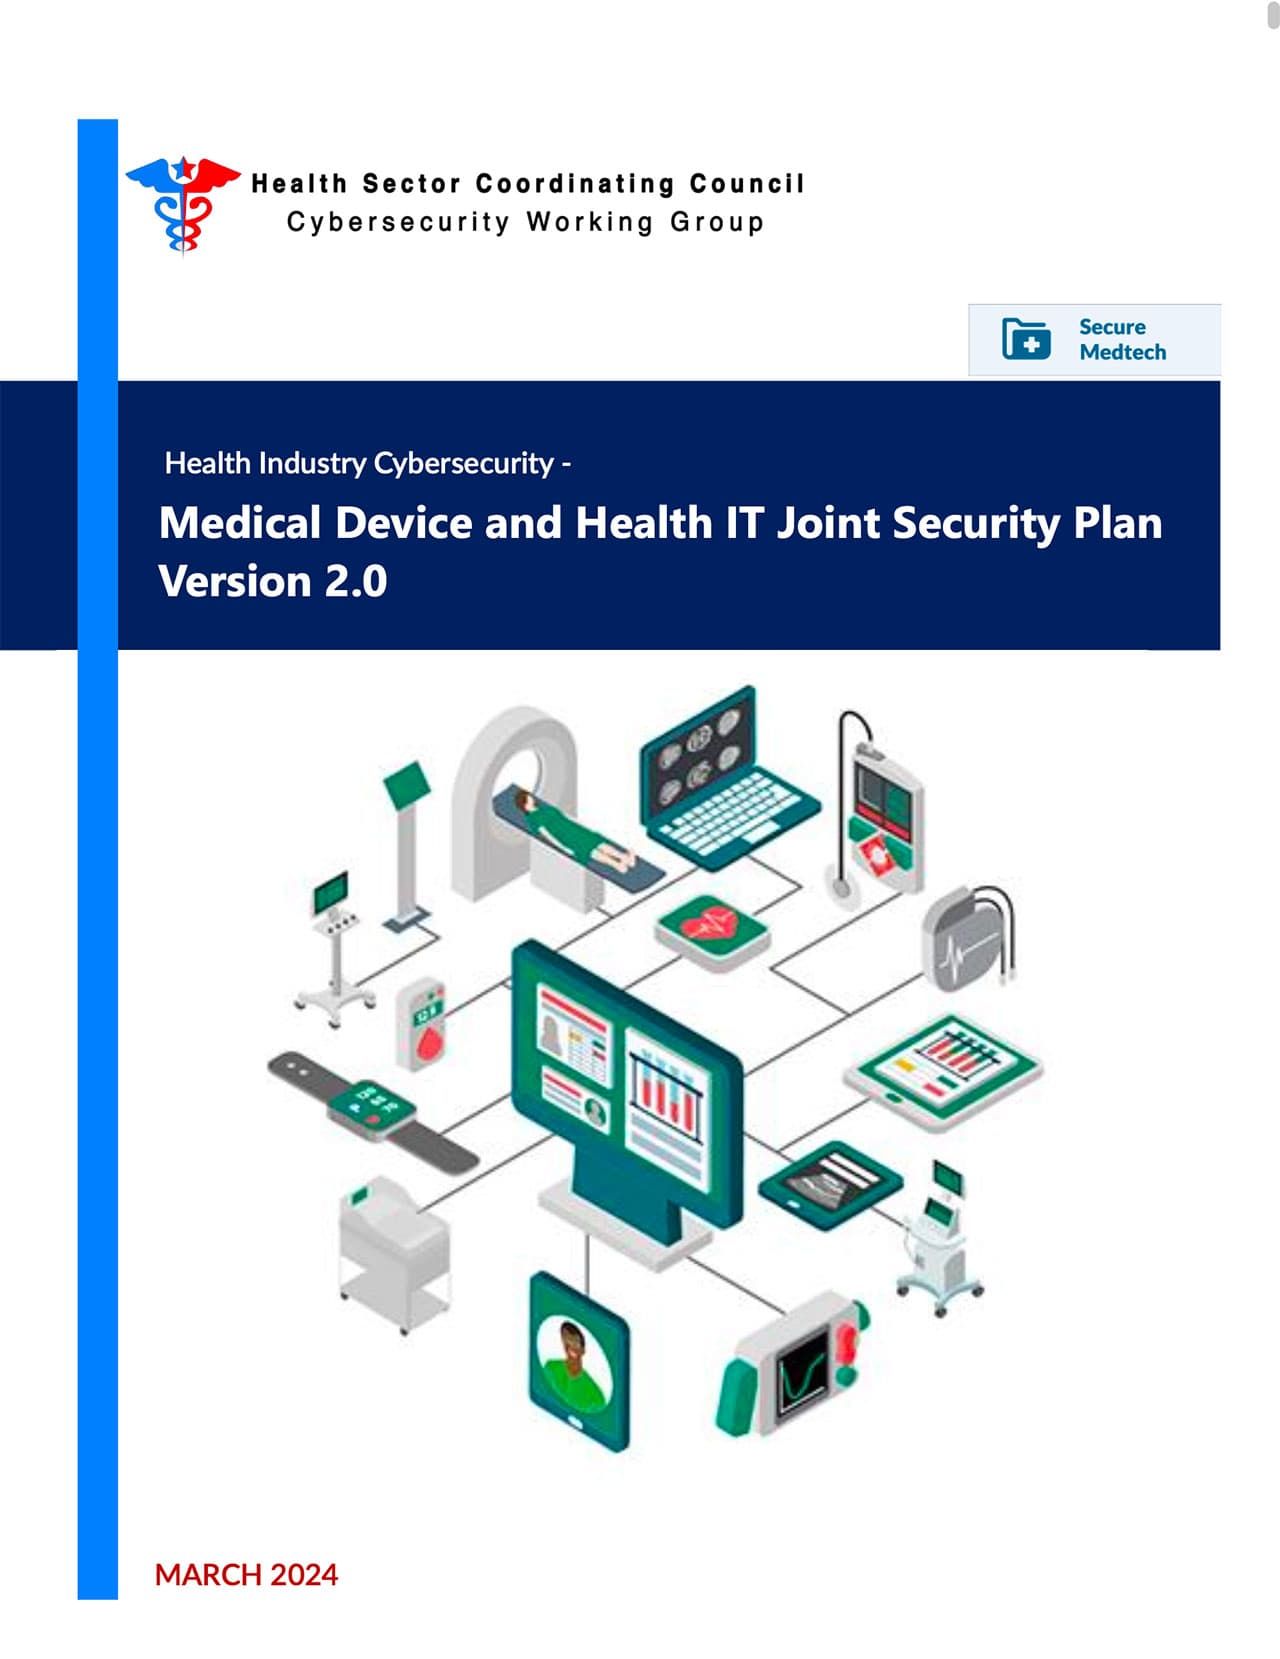 Medical Device and Health IT Joint Security Plan version 2 (JSP2)